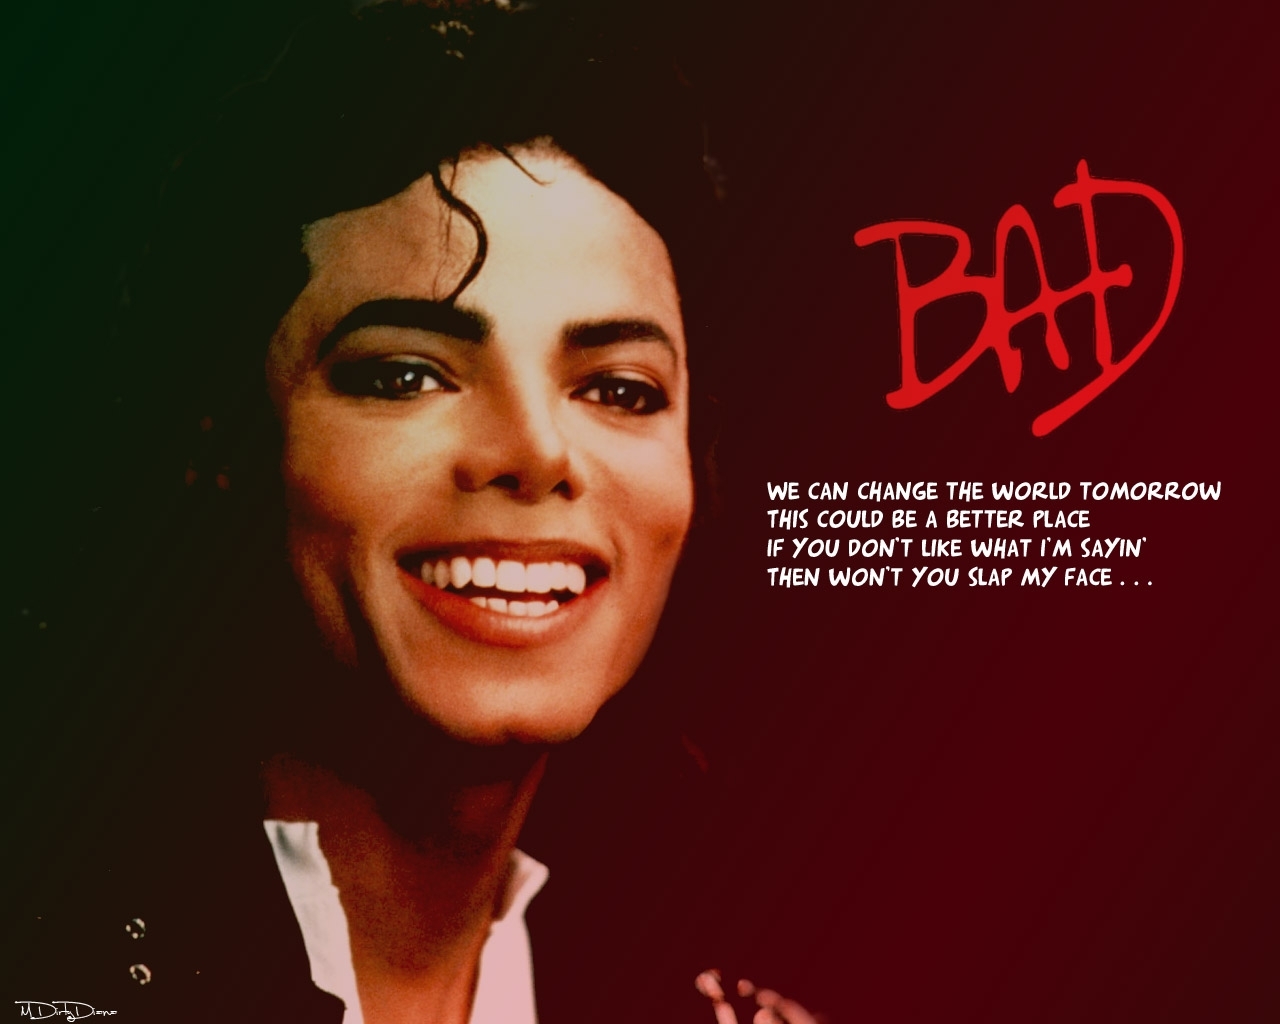 michael jackson, music, people, artists, men, red phone background